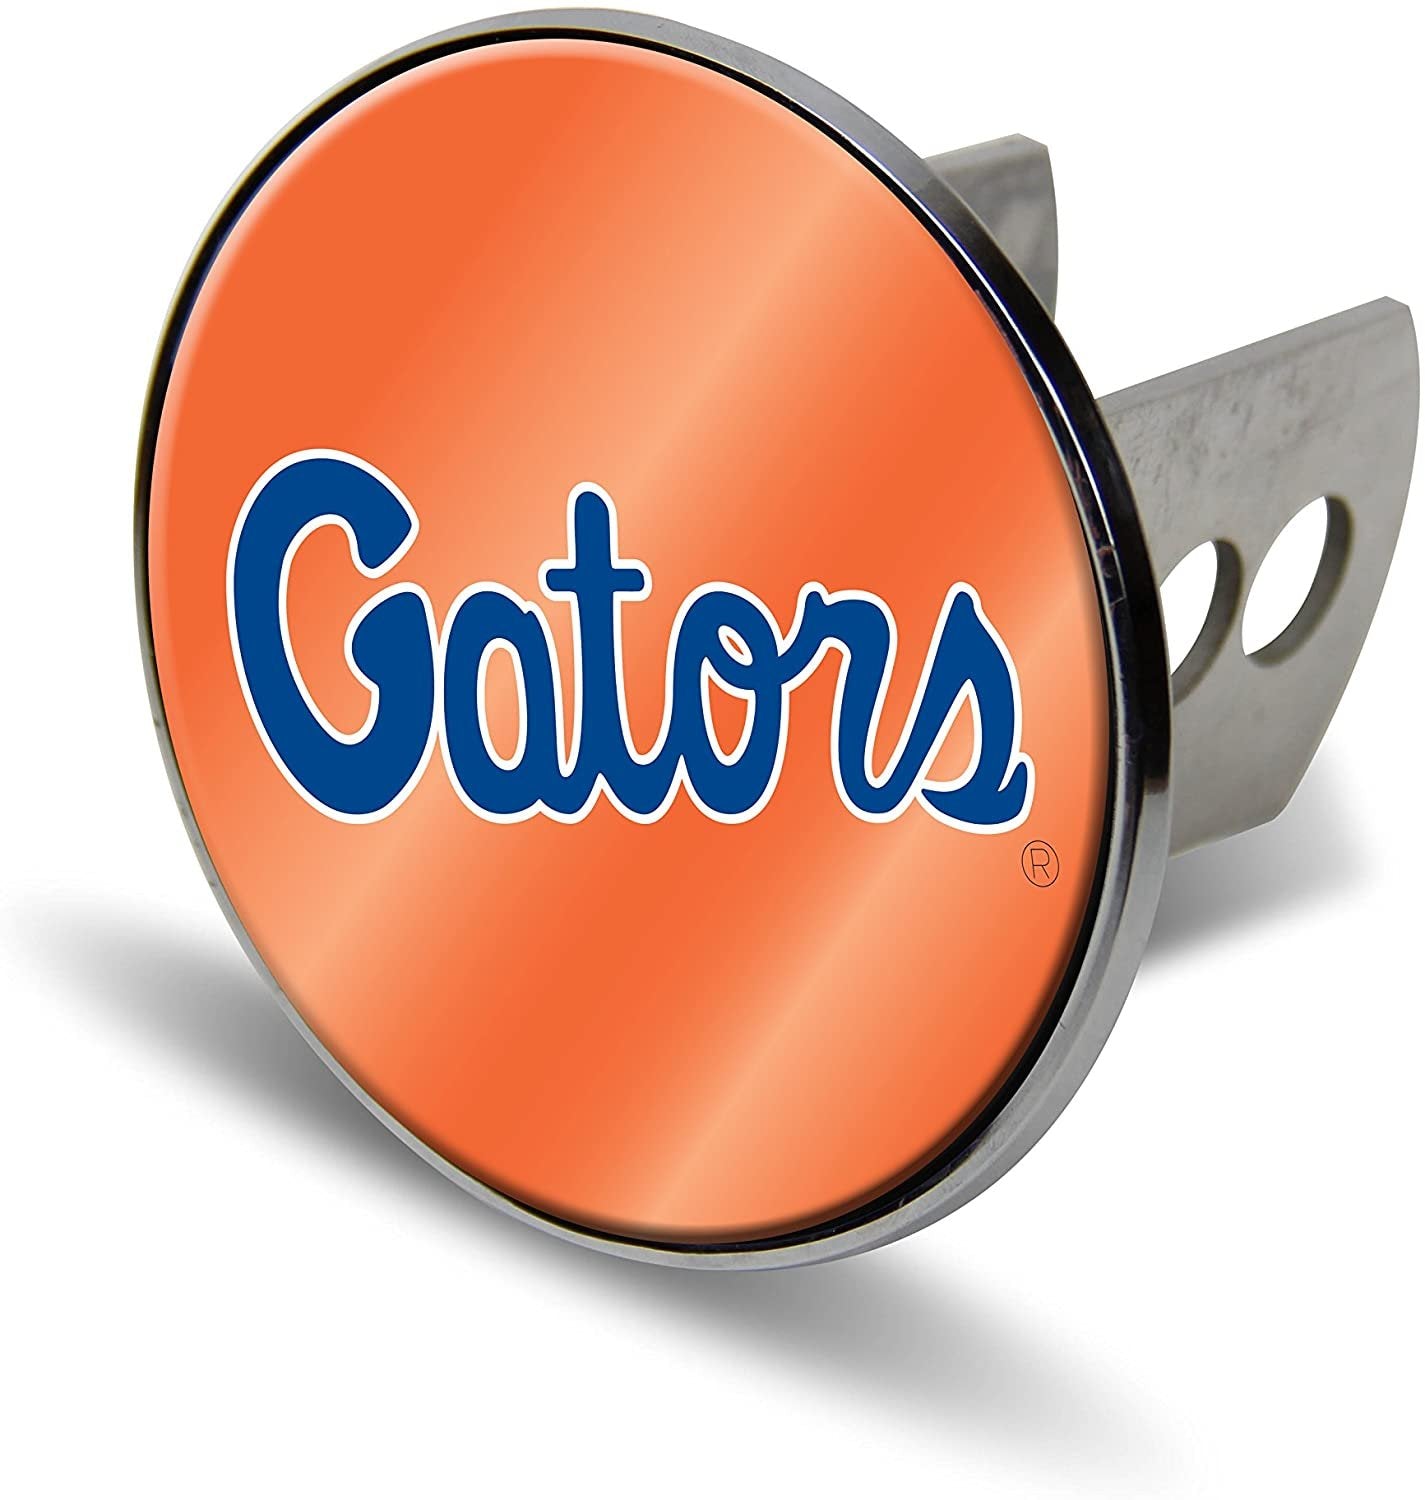 Florida Gators Metal Hitch Cover with Laser Cut Mirrored Acrylic Insert for 2 Inch Receiver University of